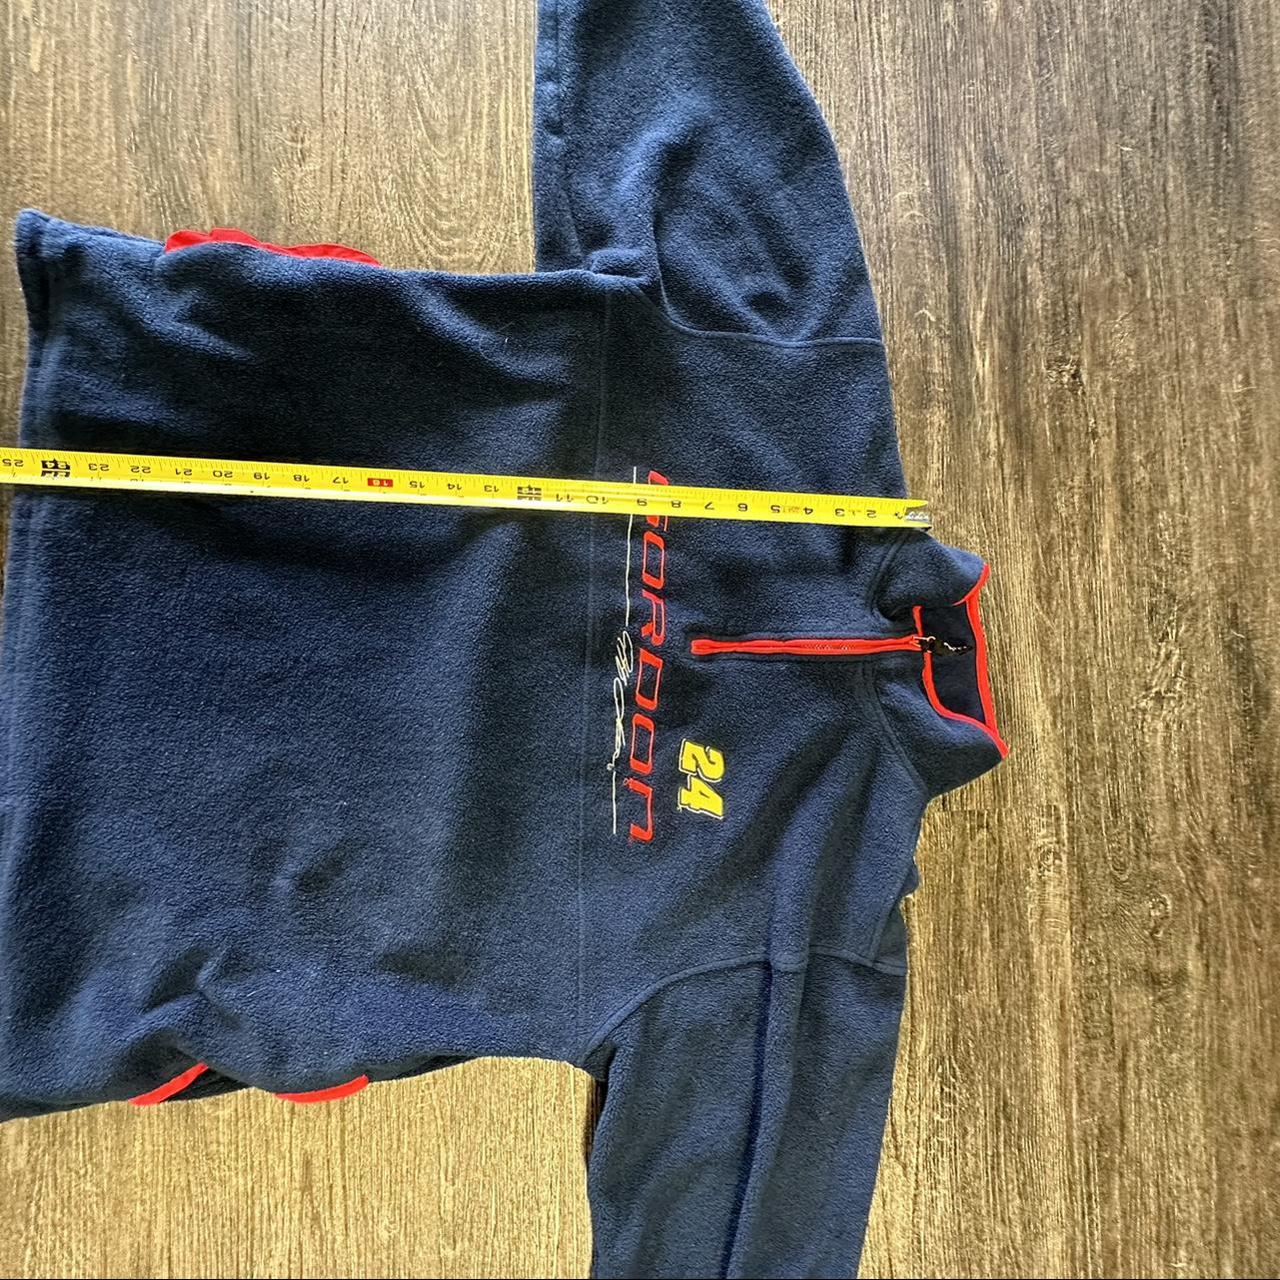 Chase Authentics Men's Navy and Red Sweatshirt (5)